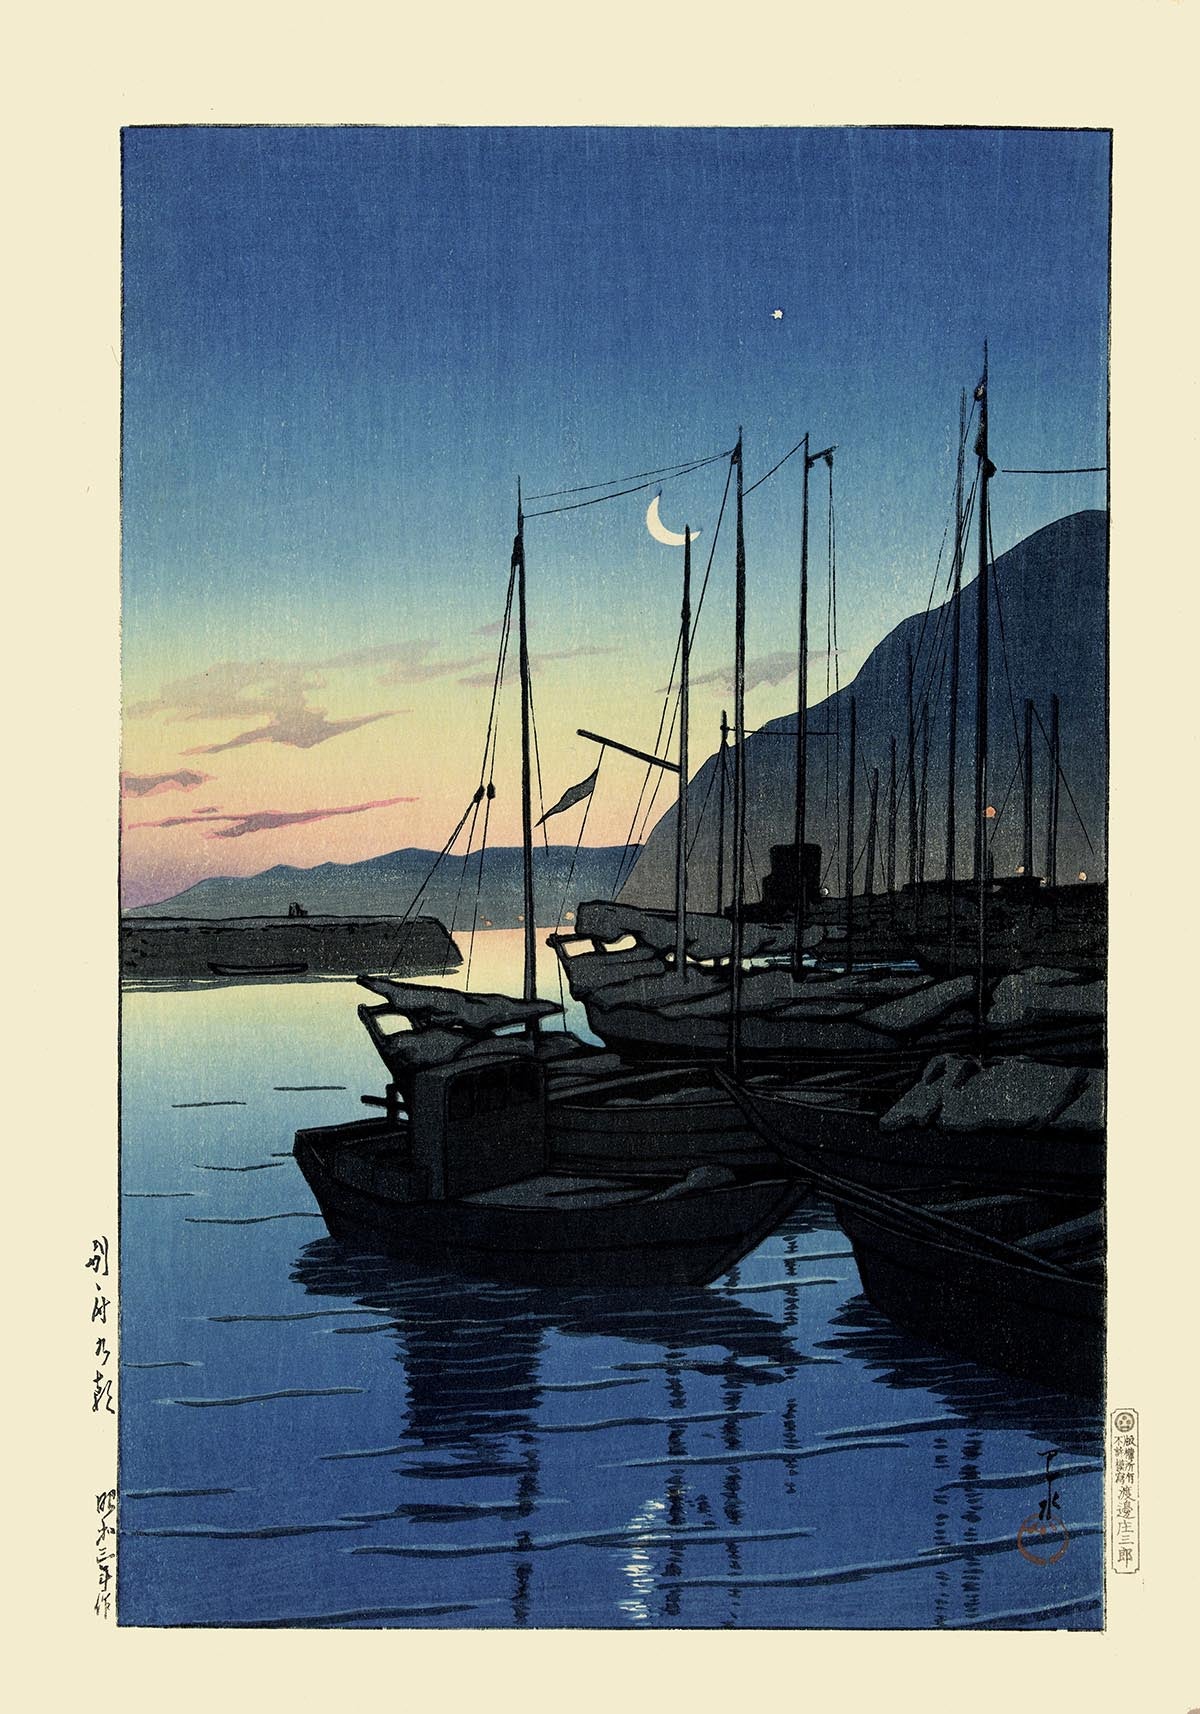 Morning in the Beppu by Hasui